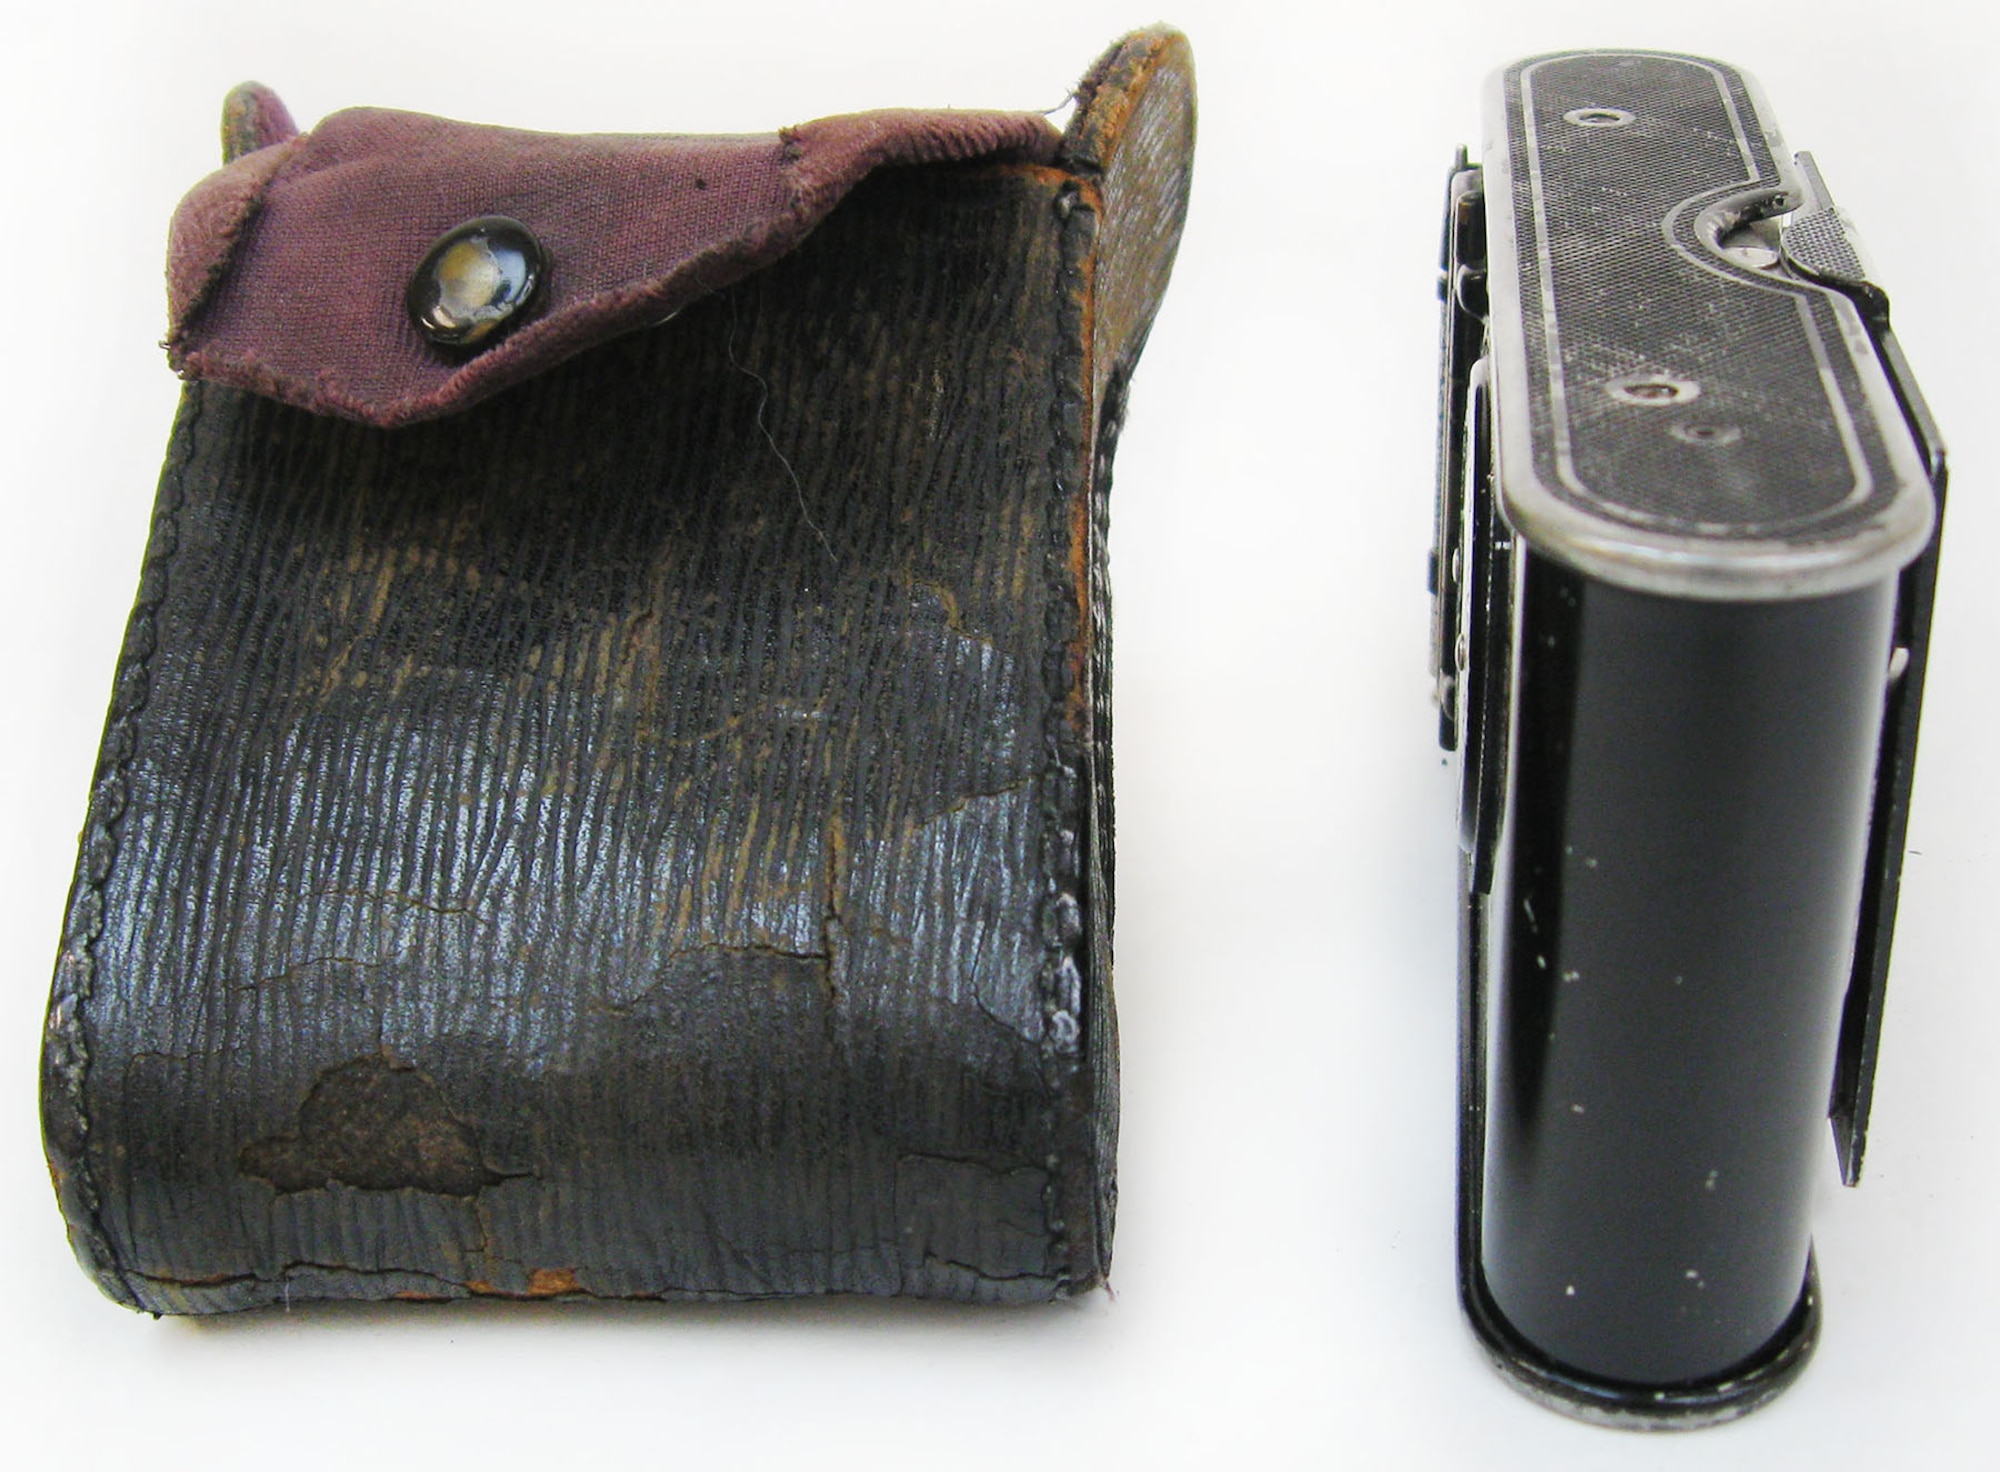 This is a folding style camera that, when not extended for use, can be carried in one’s jacket or vest pocket. Kodak advertised this vest pocket camera as “the soldier’s camera” during World War I. It was one of the most popular and best-selling cameras bought and used during the war and into the 1920s. (U.S. Air Force photo)